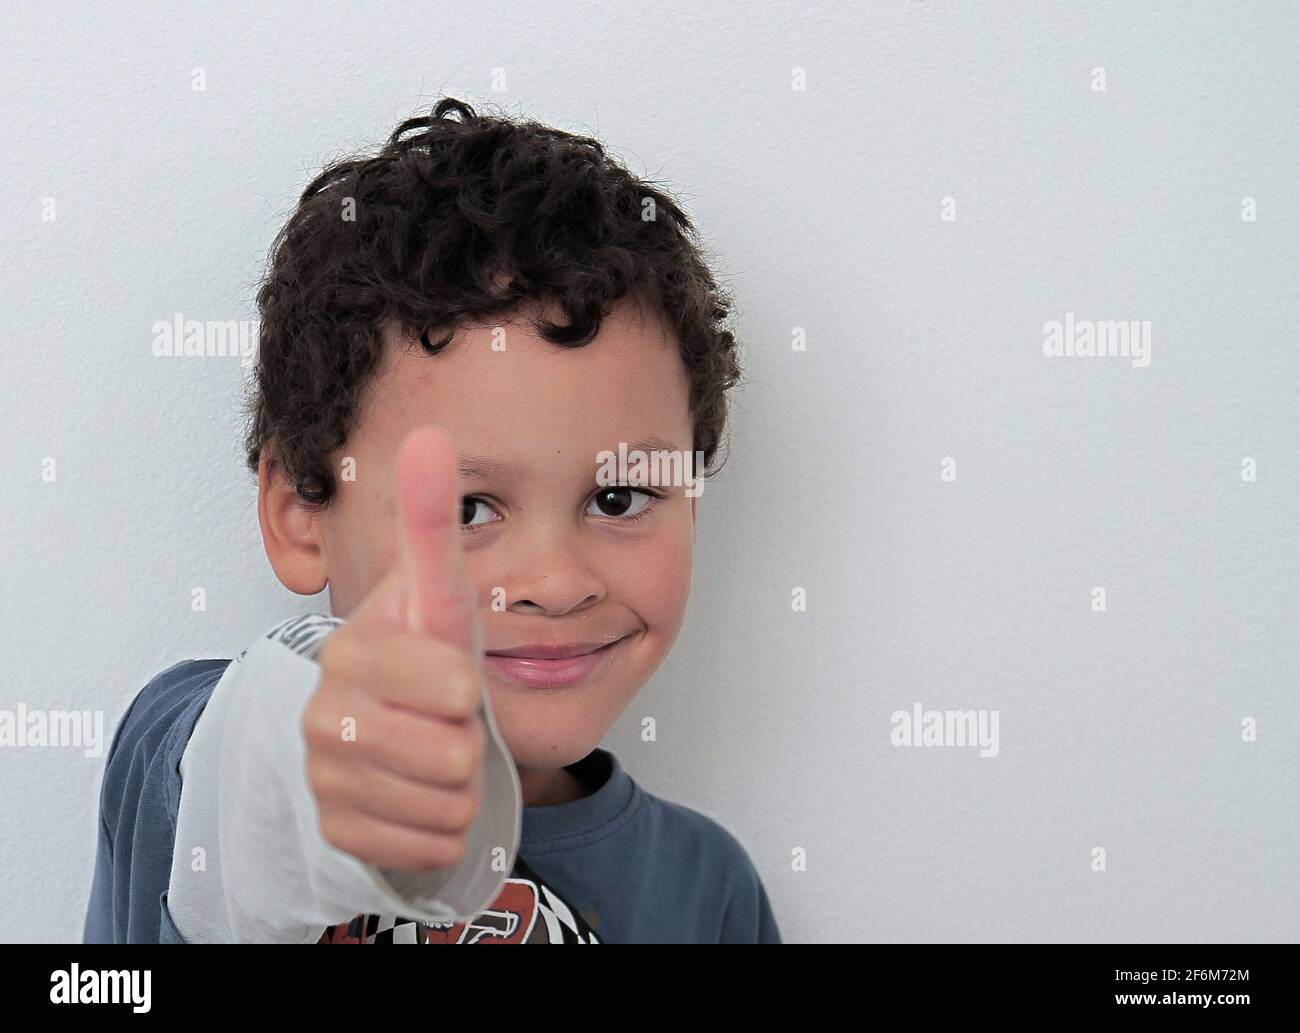 boy with thumbs up gesture on grey background stock photo Stock Photo